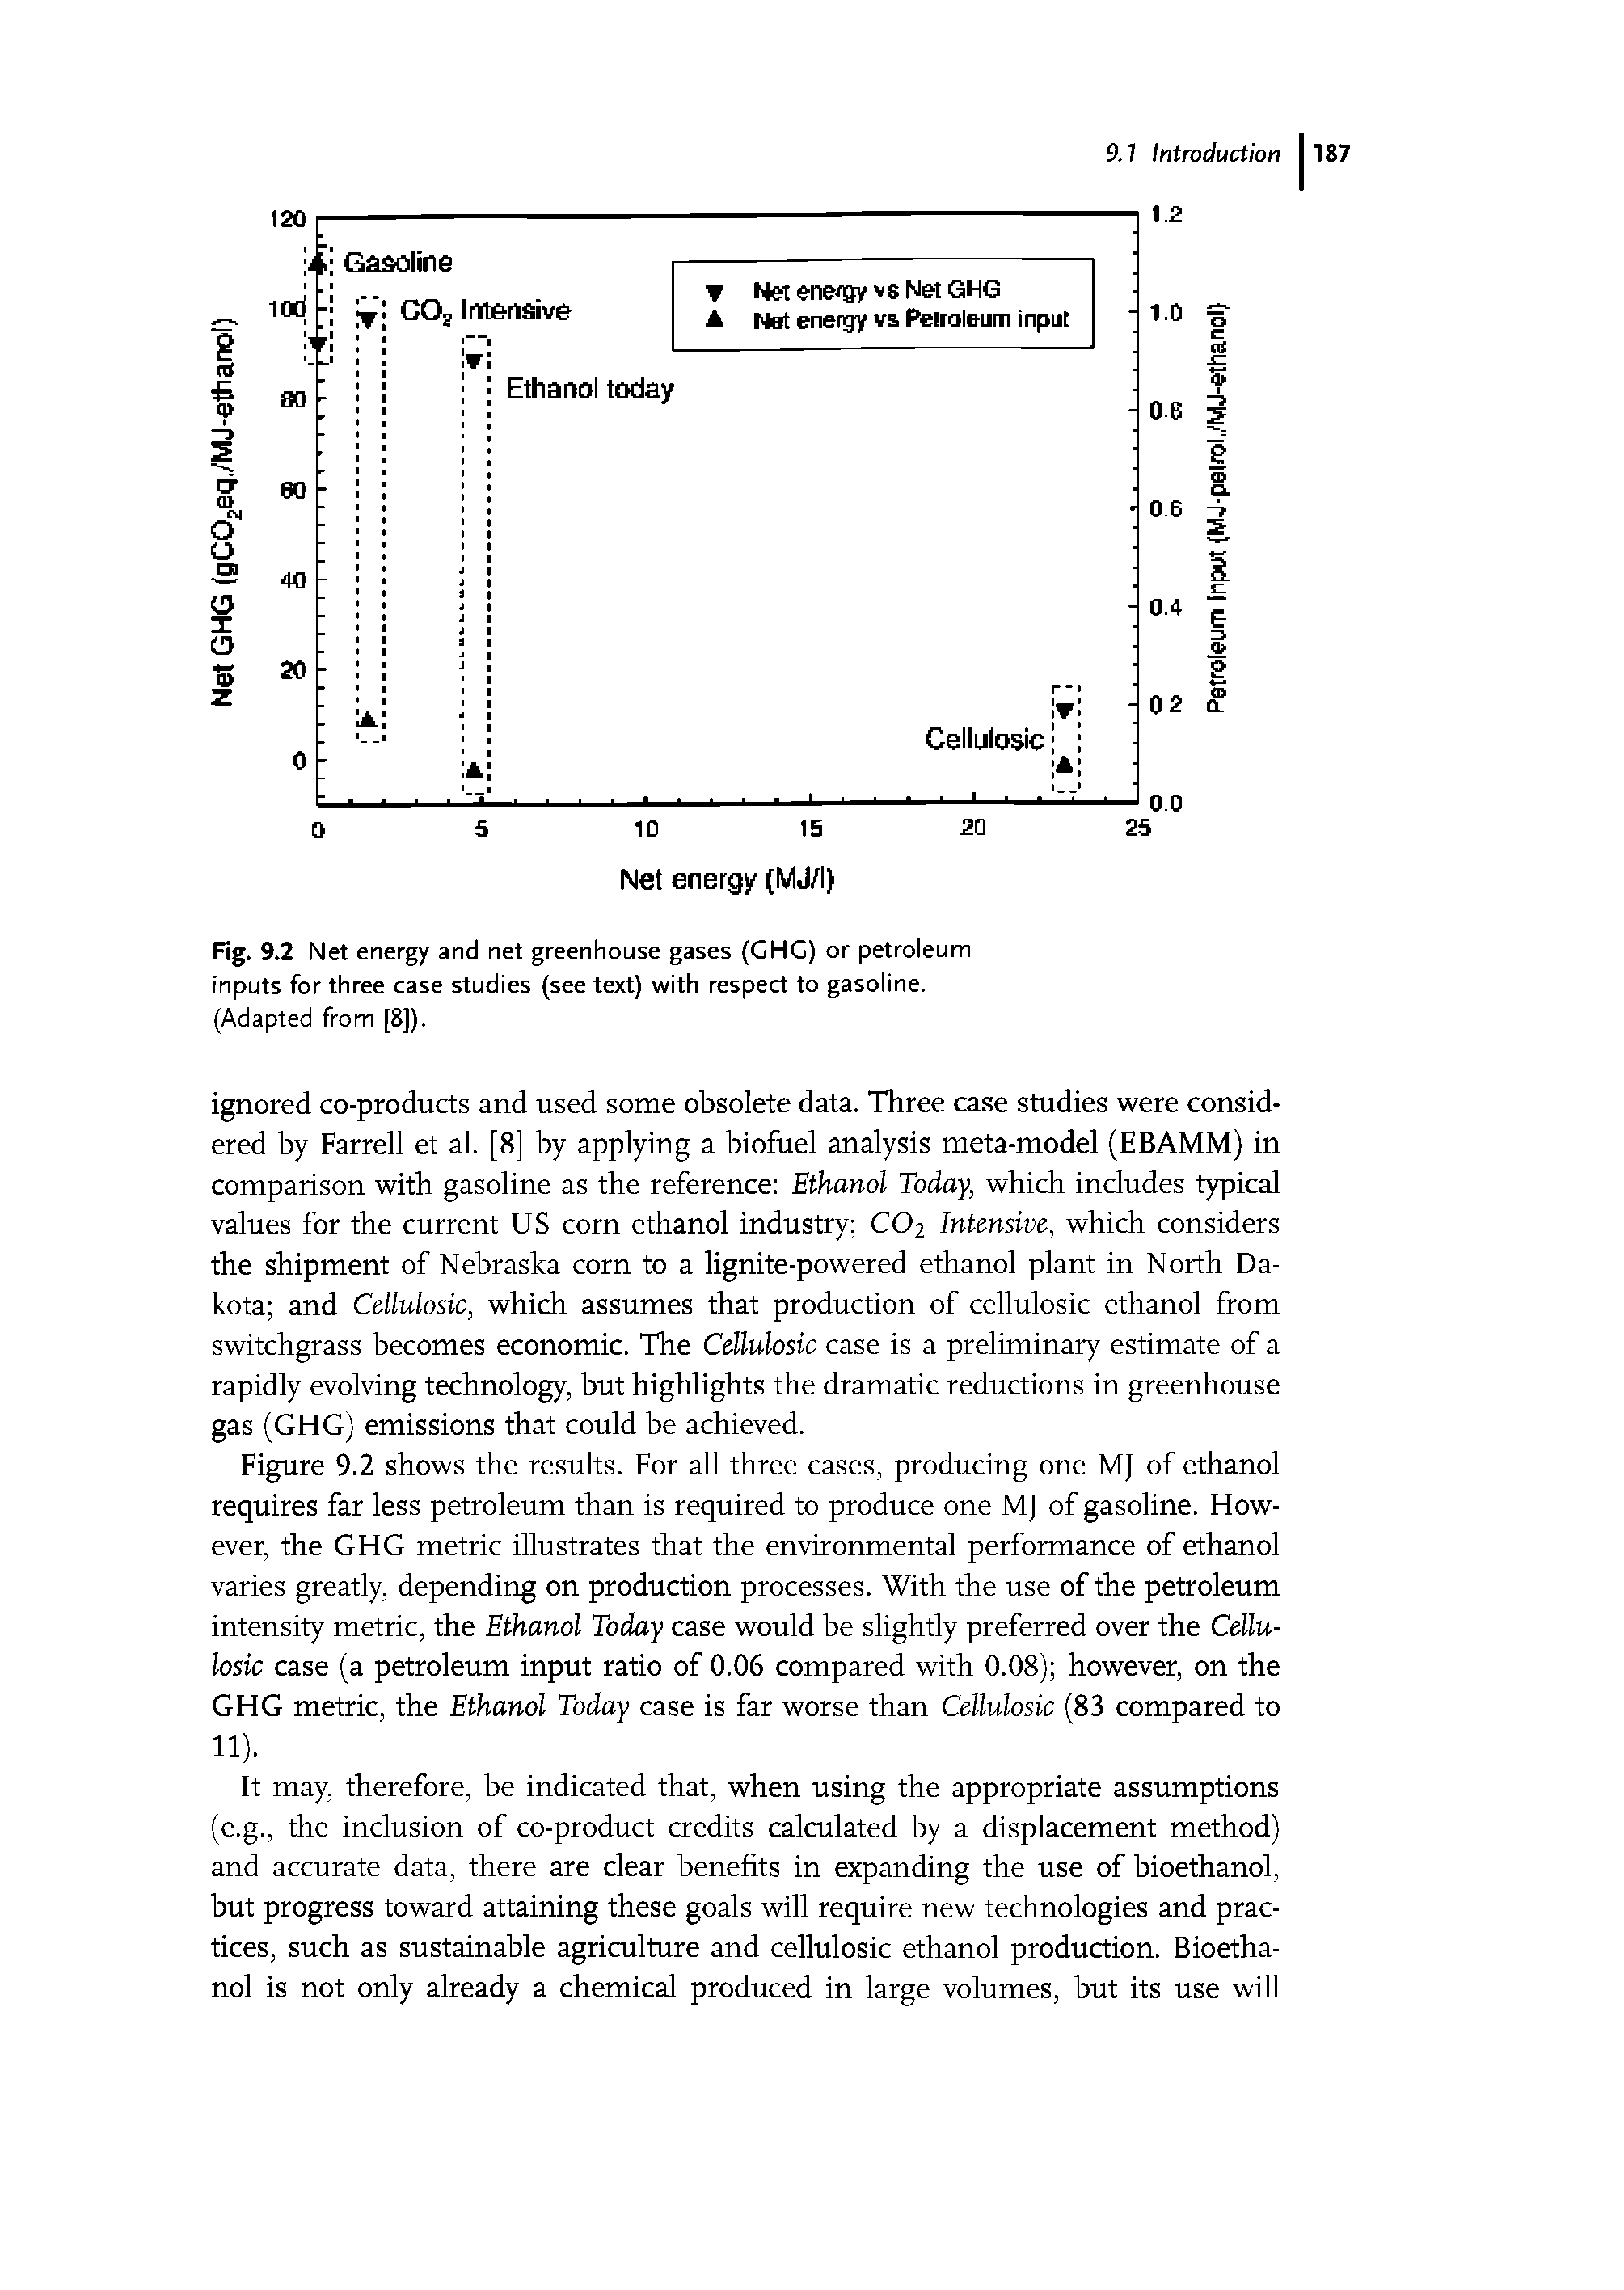 Fig. 9.2 Net energy and net greenhouse gases (GHG) or petroleum inputs for three case studies (see text) with respect to gasoline.